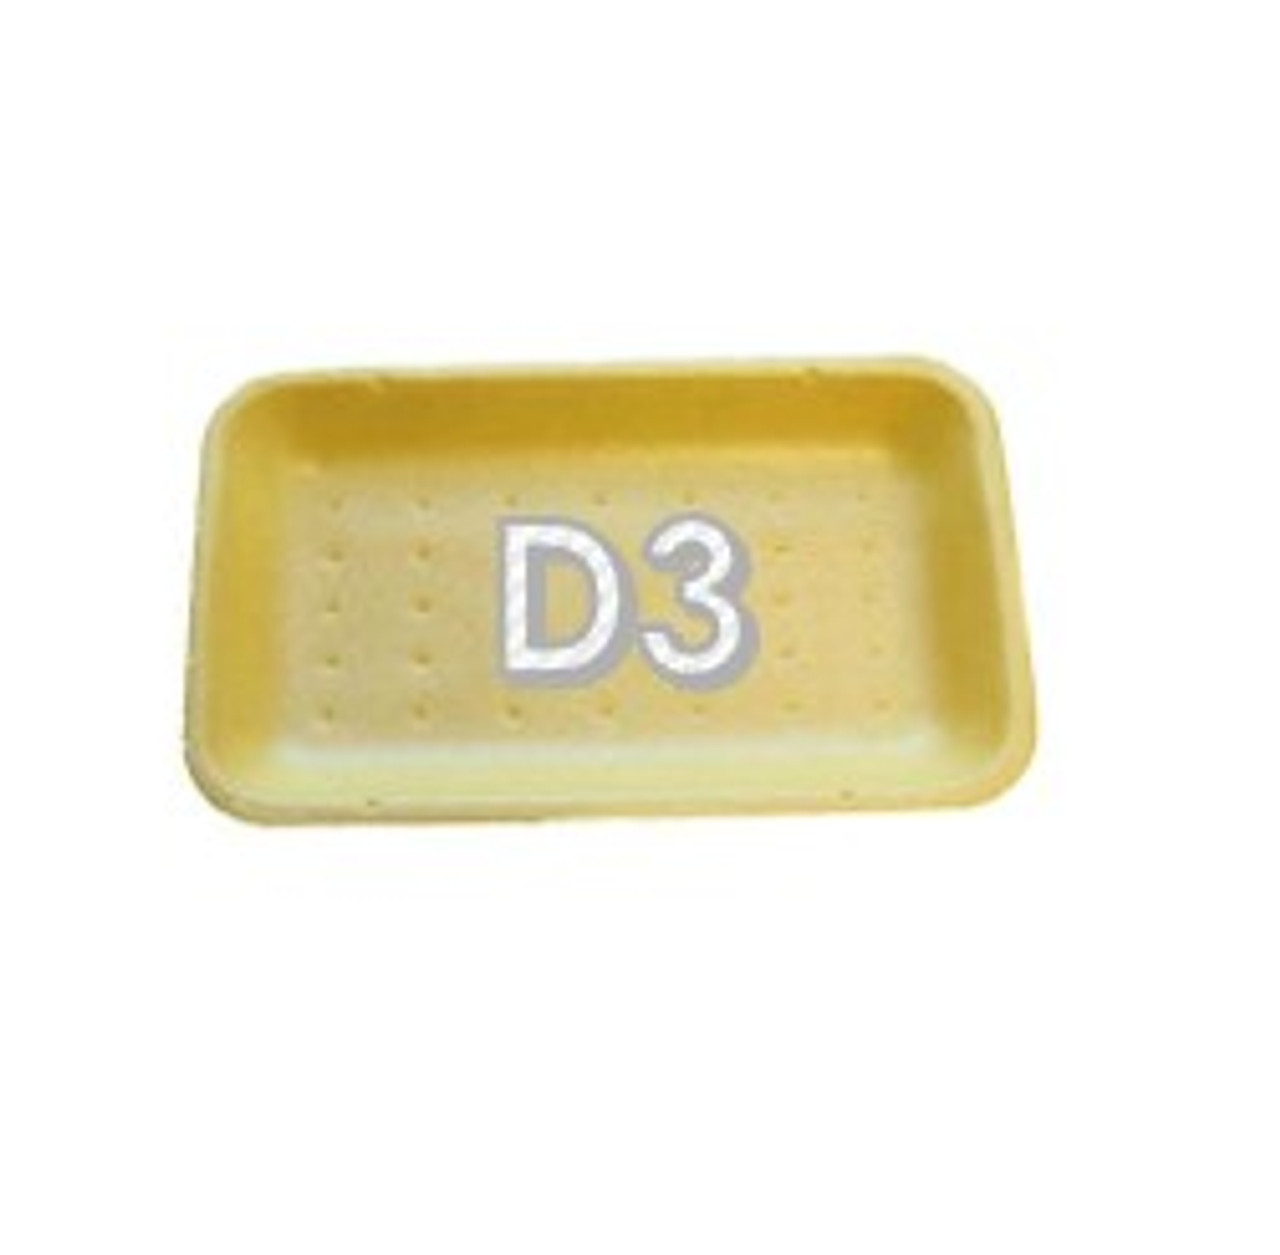 Pack x 500 - D3 Yellow Polystyrene Linstar trays (222 x 133 x 20mm) Specials